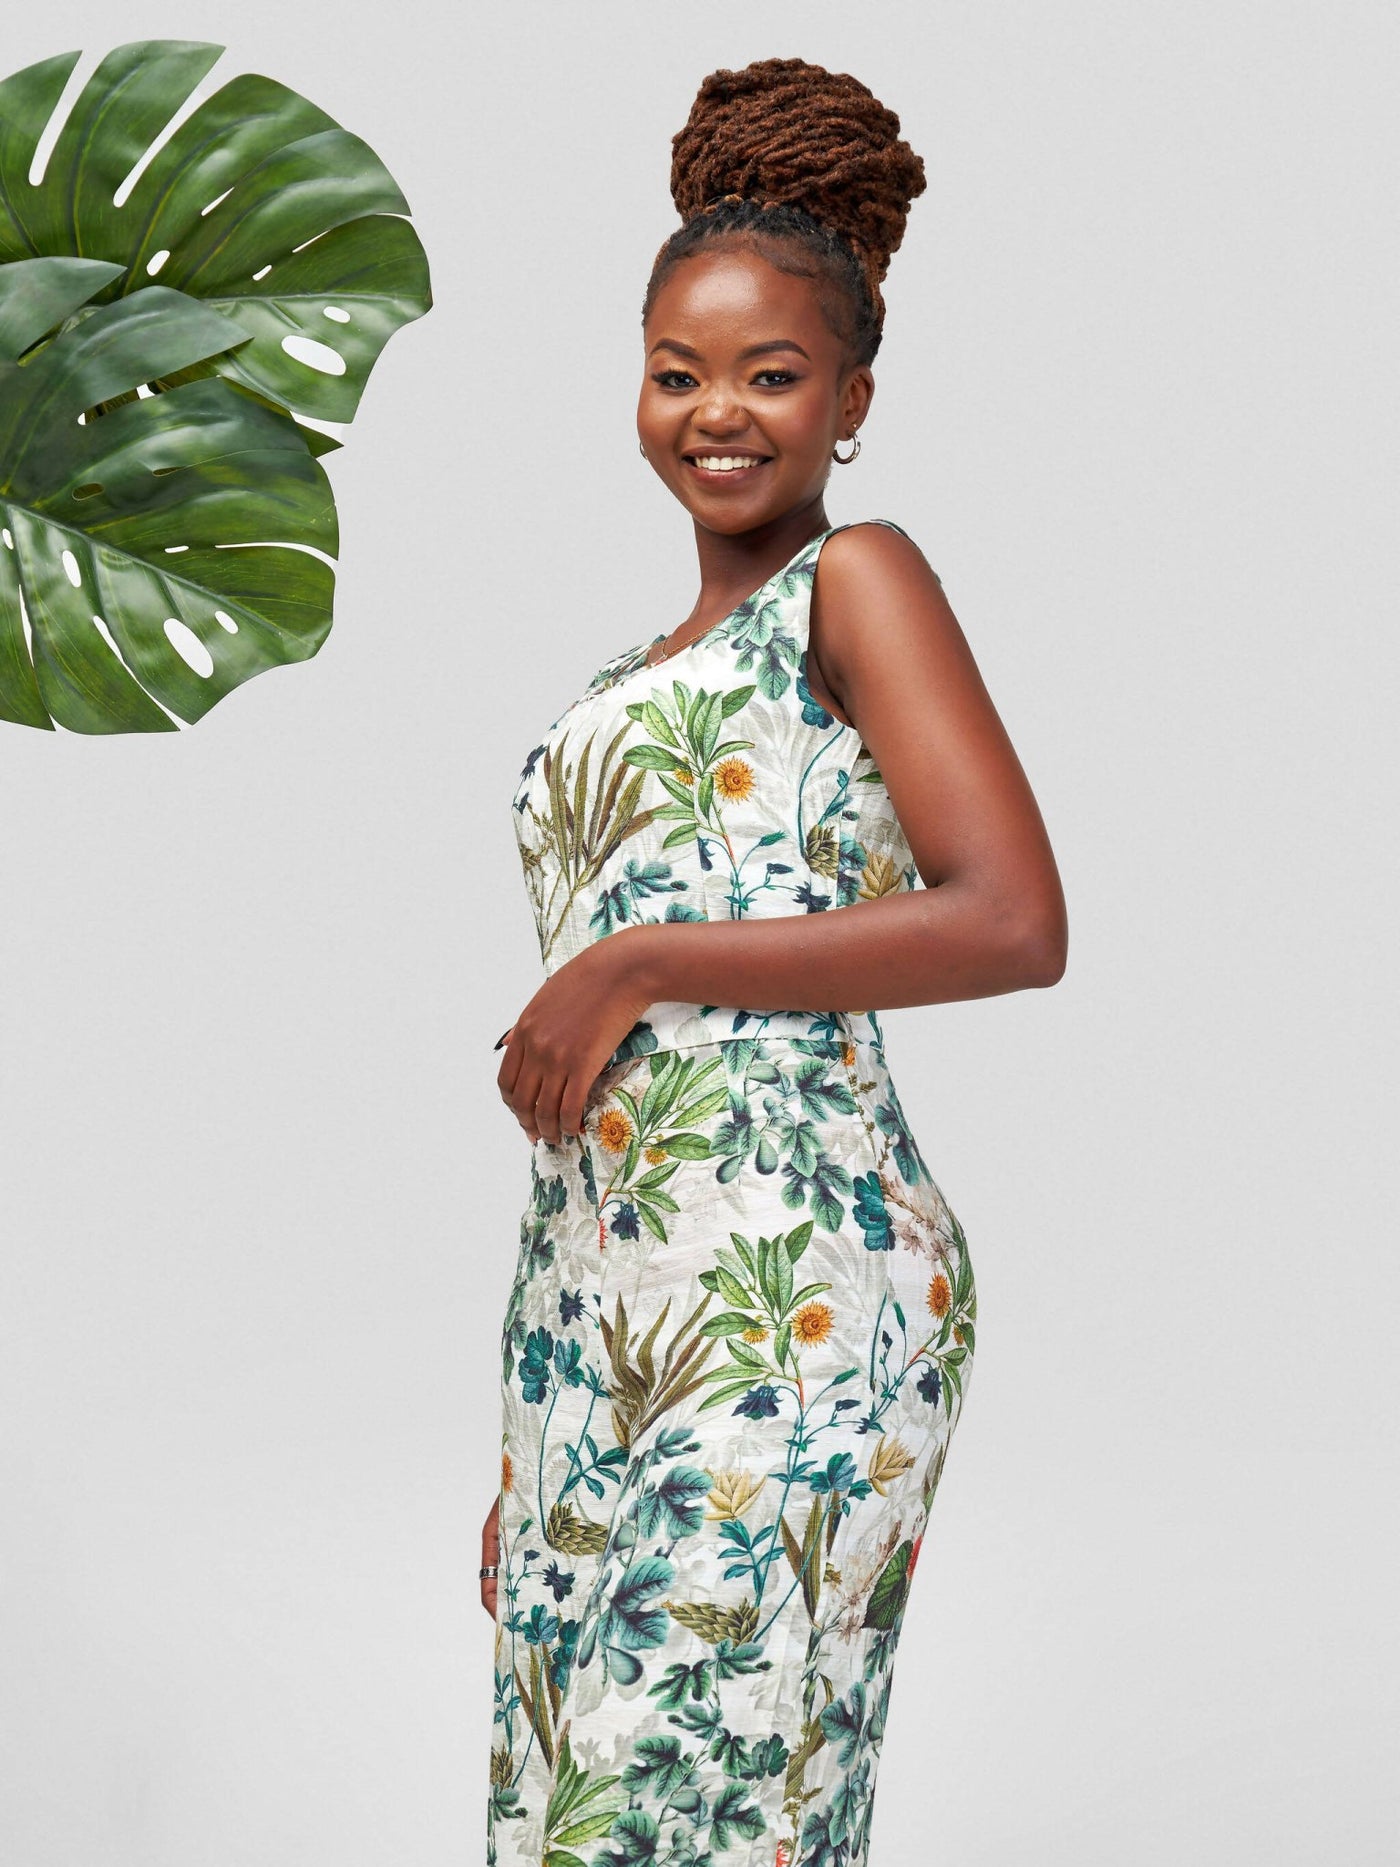 Immaculate Chic Jumpsuit - Green Floral - Shopzetu